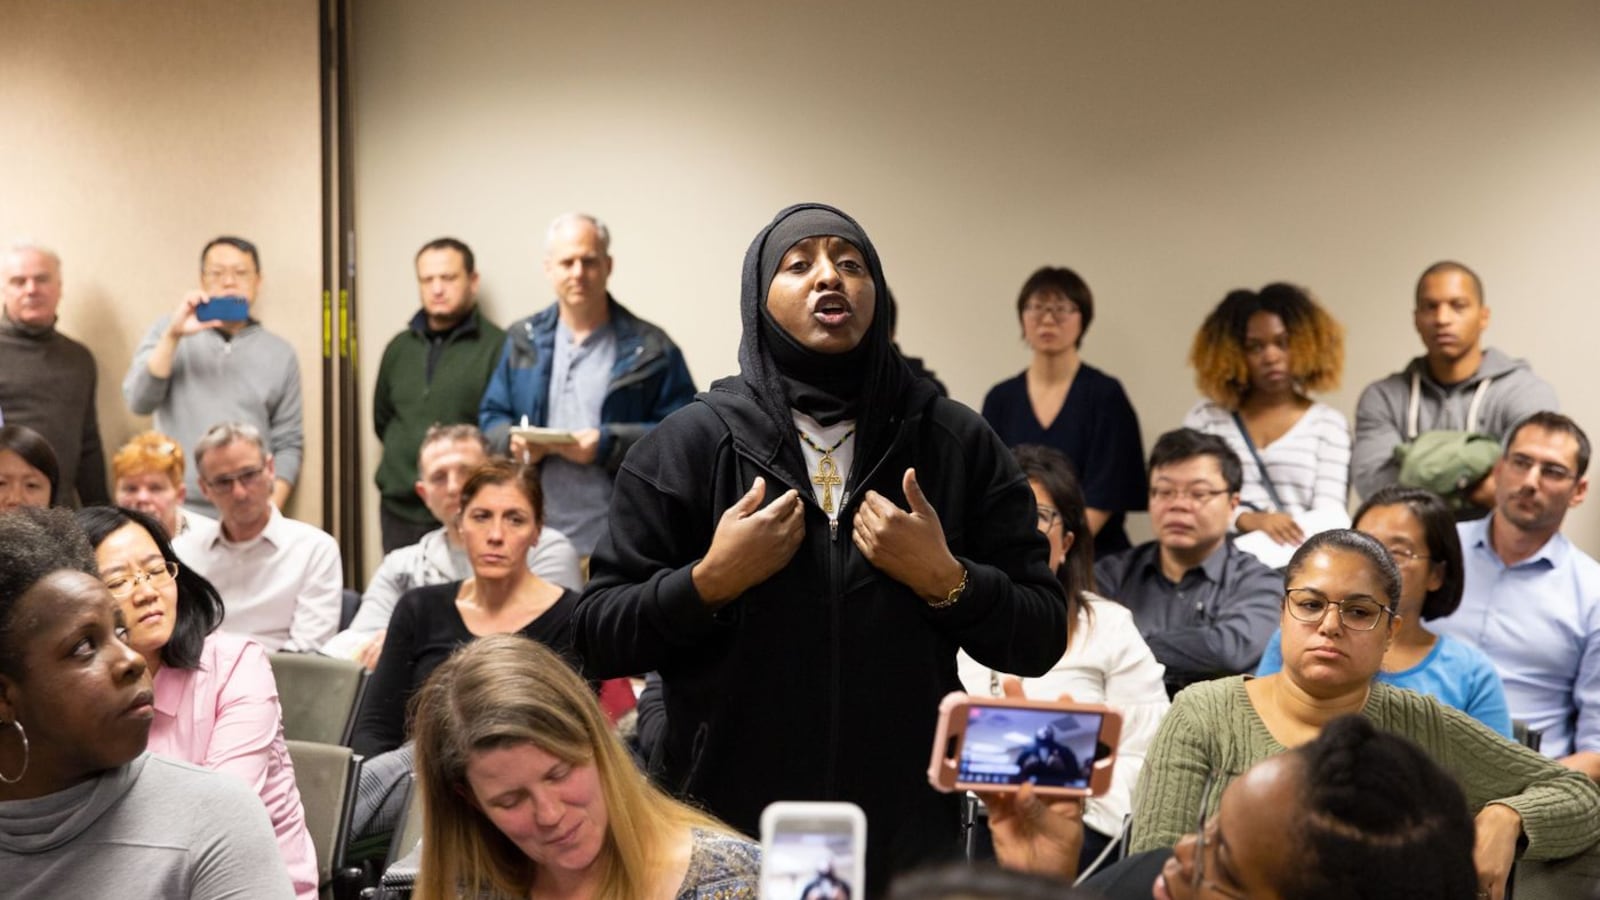 Parent Lorraine Reid argued for more resources for schools serving mostly children of color at a public meeting to discuss plans to integrate District 28 middle schools.